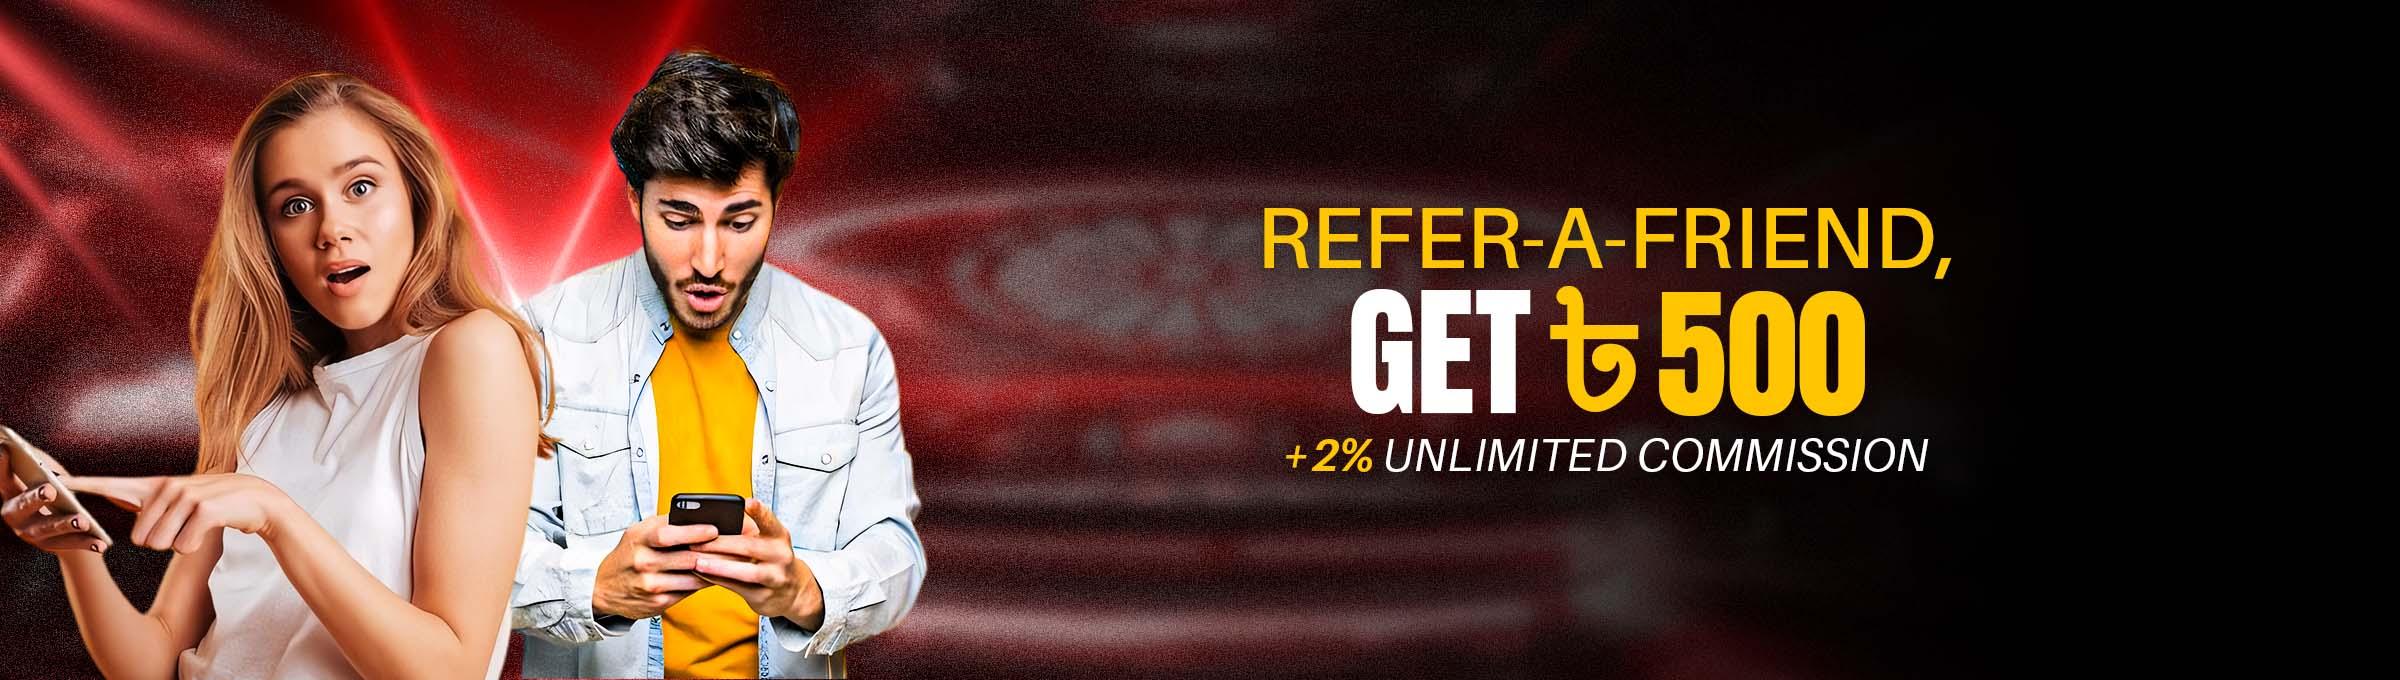 Unlimited ৳500 and a 2% Deposit Commission